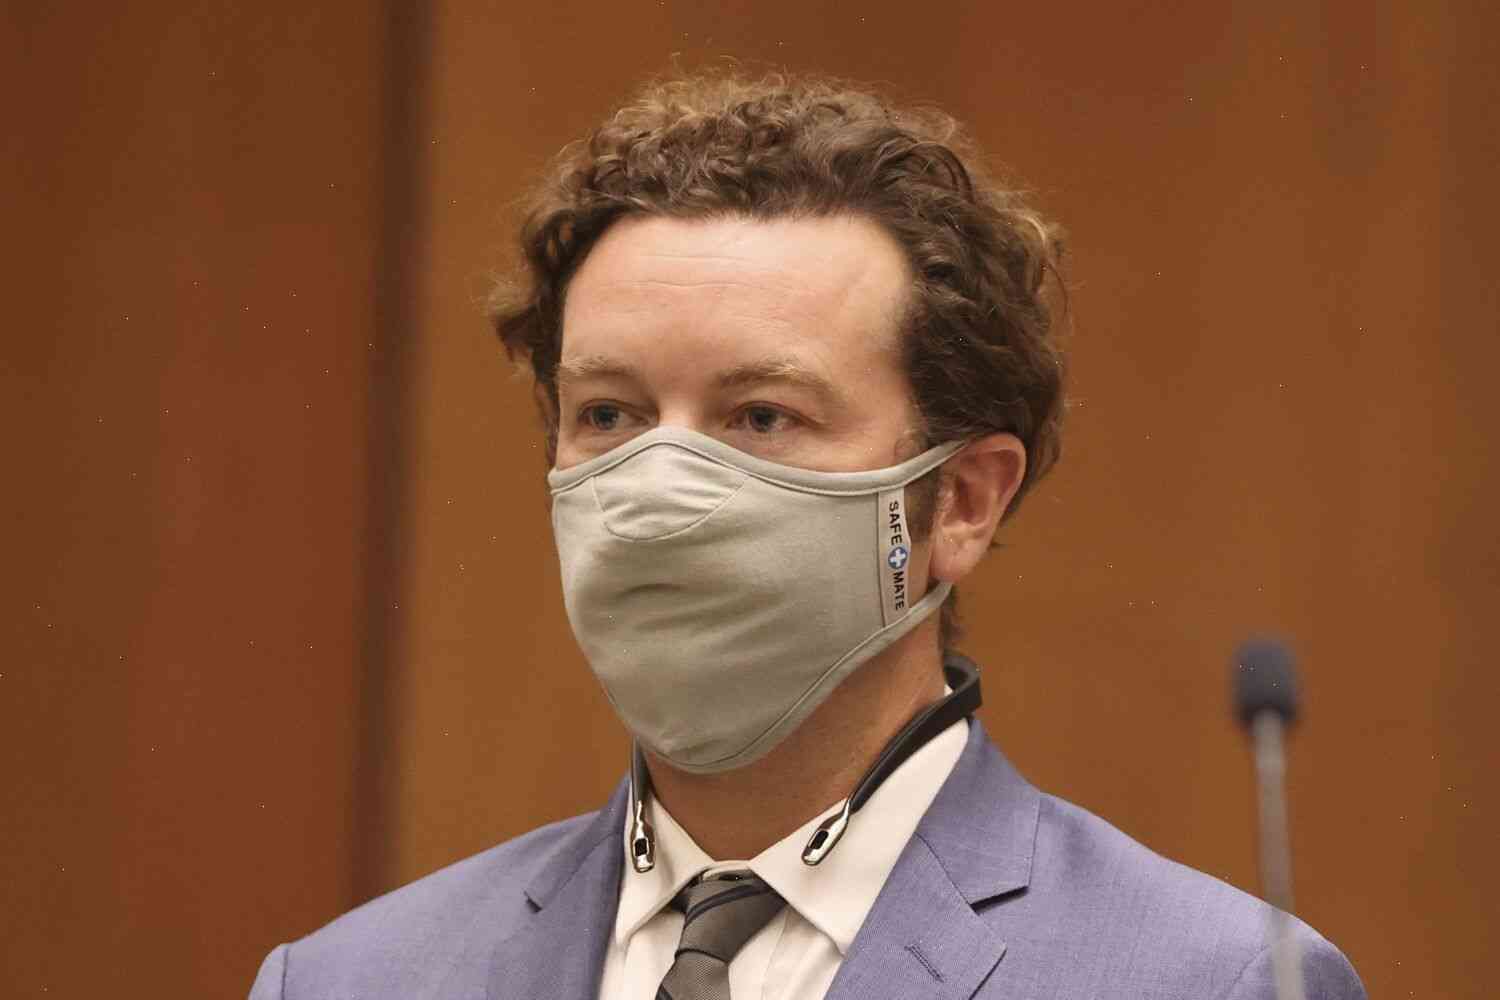 The woman who claims she was raped by Danny Masterson is testifying for the first time in the trial of Danny Masterson